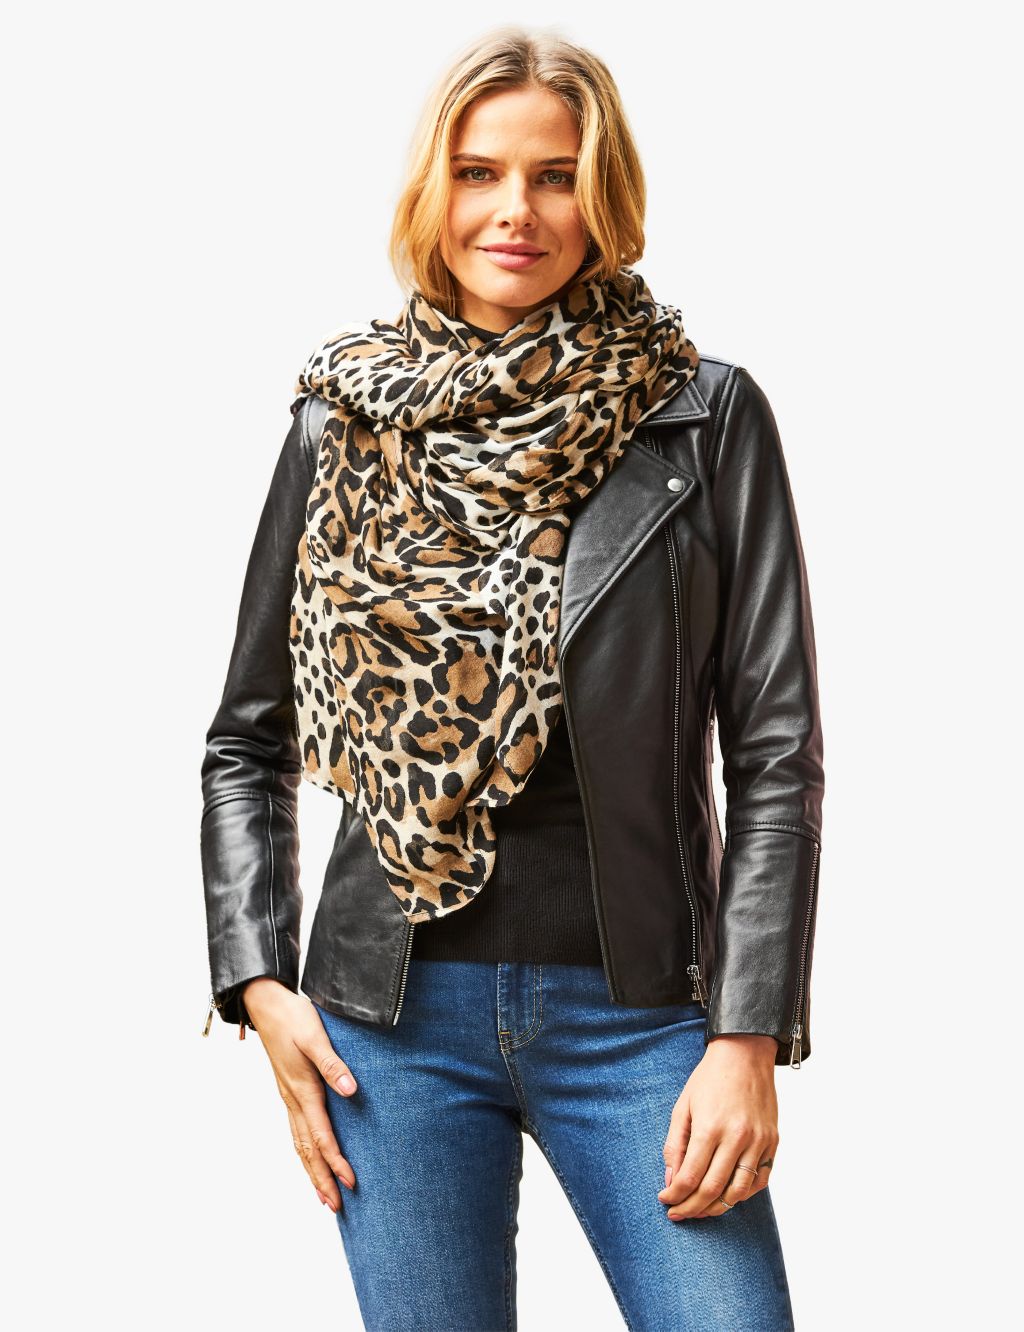 Supersoft Leopard Print Scarf image 3